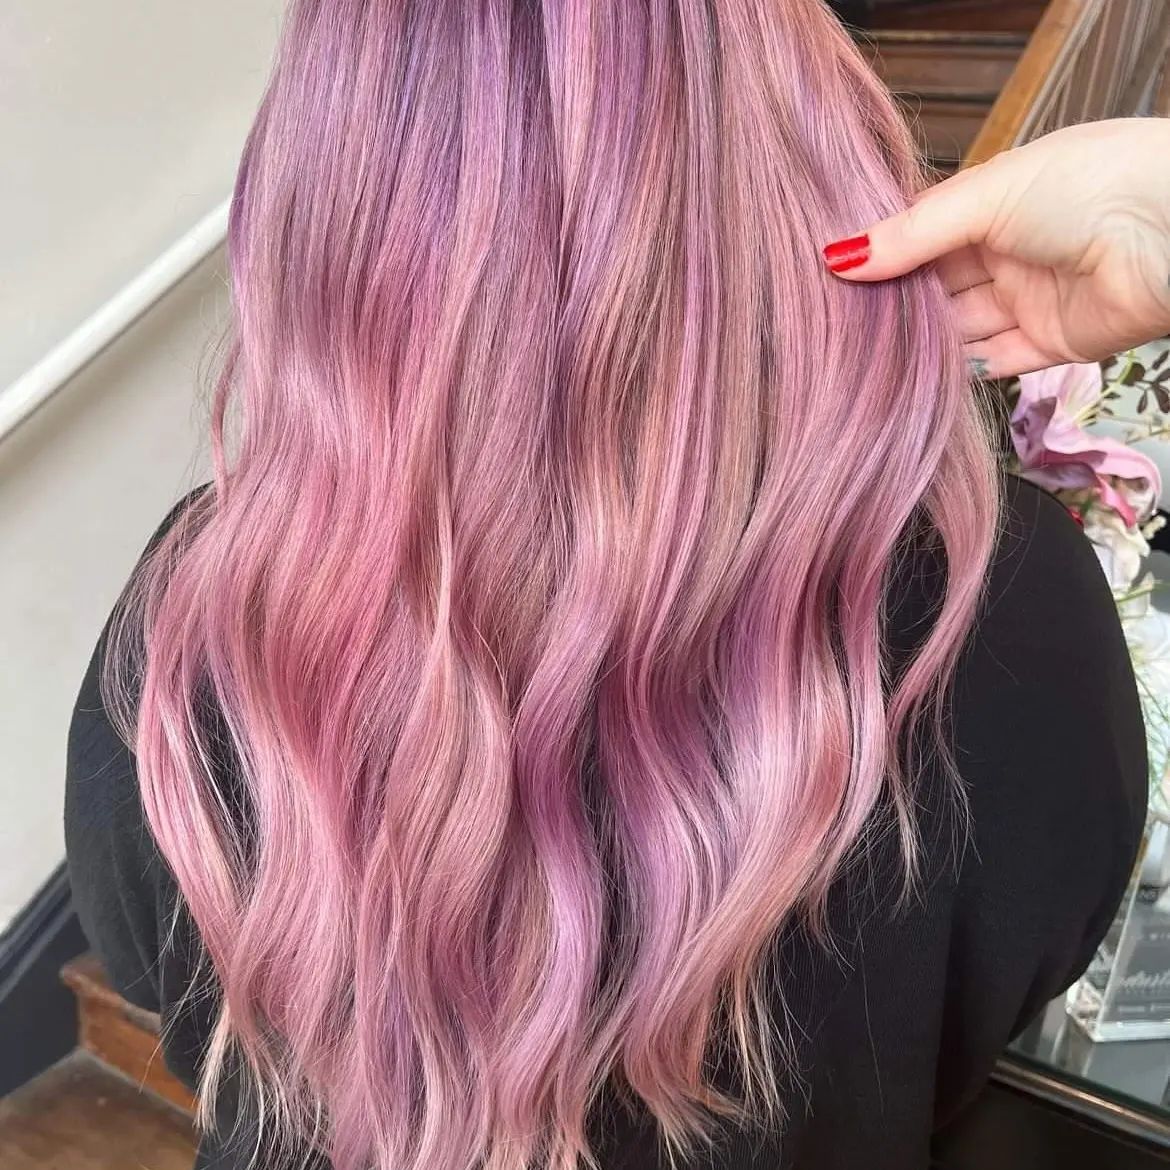 pink ombre hair color 63 Ombre pink hair blonde | Pastel pink ombre hair | Pink balayage Hair Pink Ombre Hair Color for Women